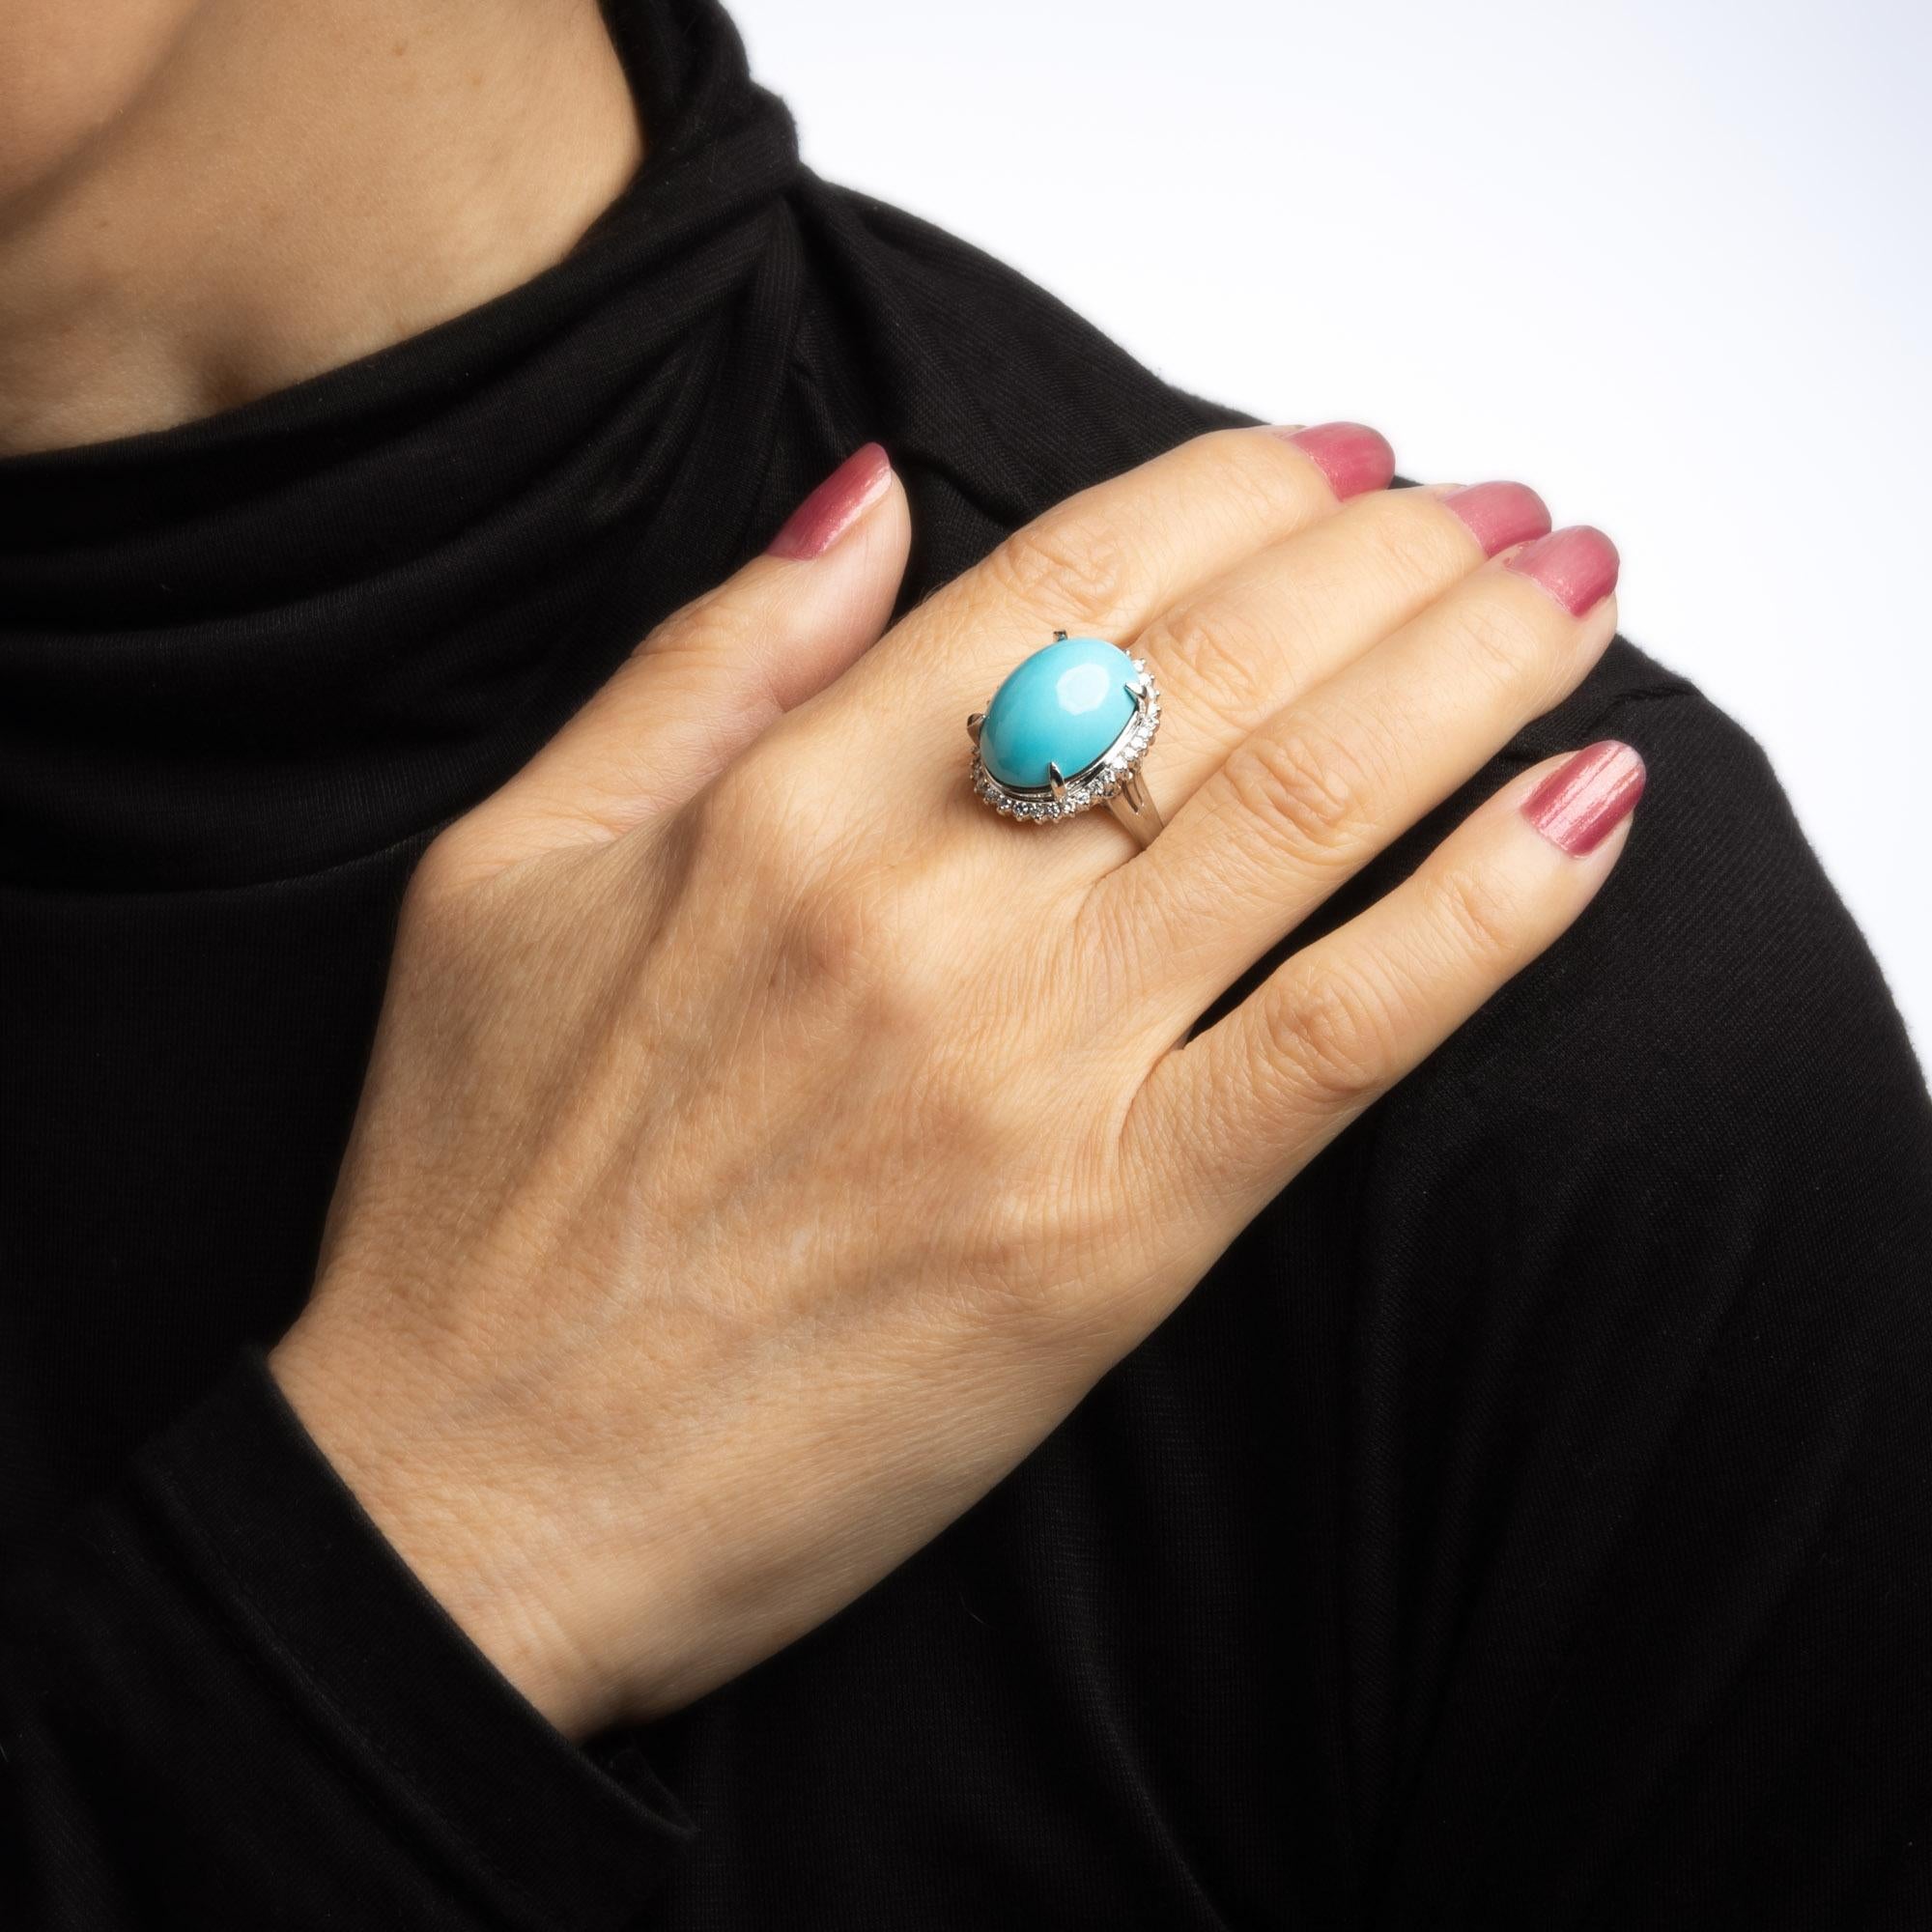 Modern Egg Shell Blue Turquoise Diamond Ring Platinum Estate Large Cocktail Jewelry For Sale